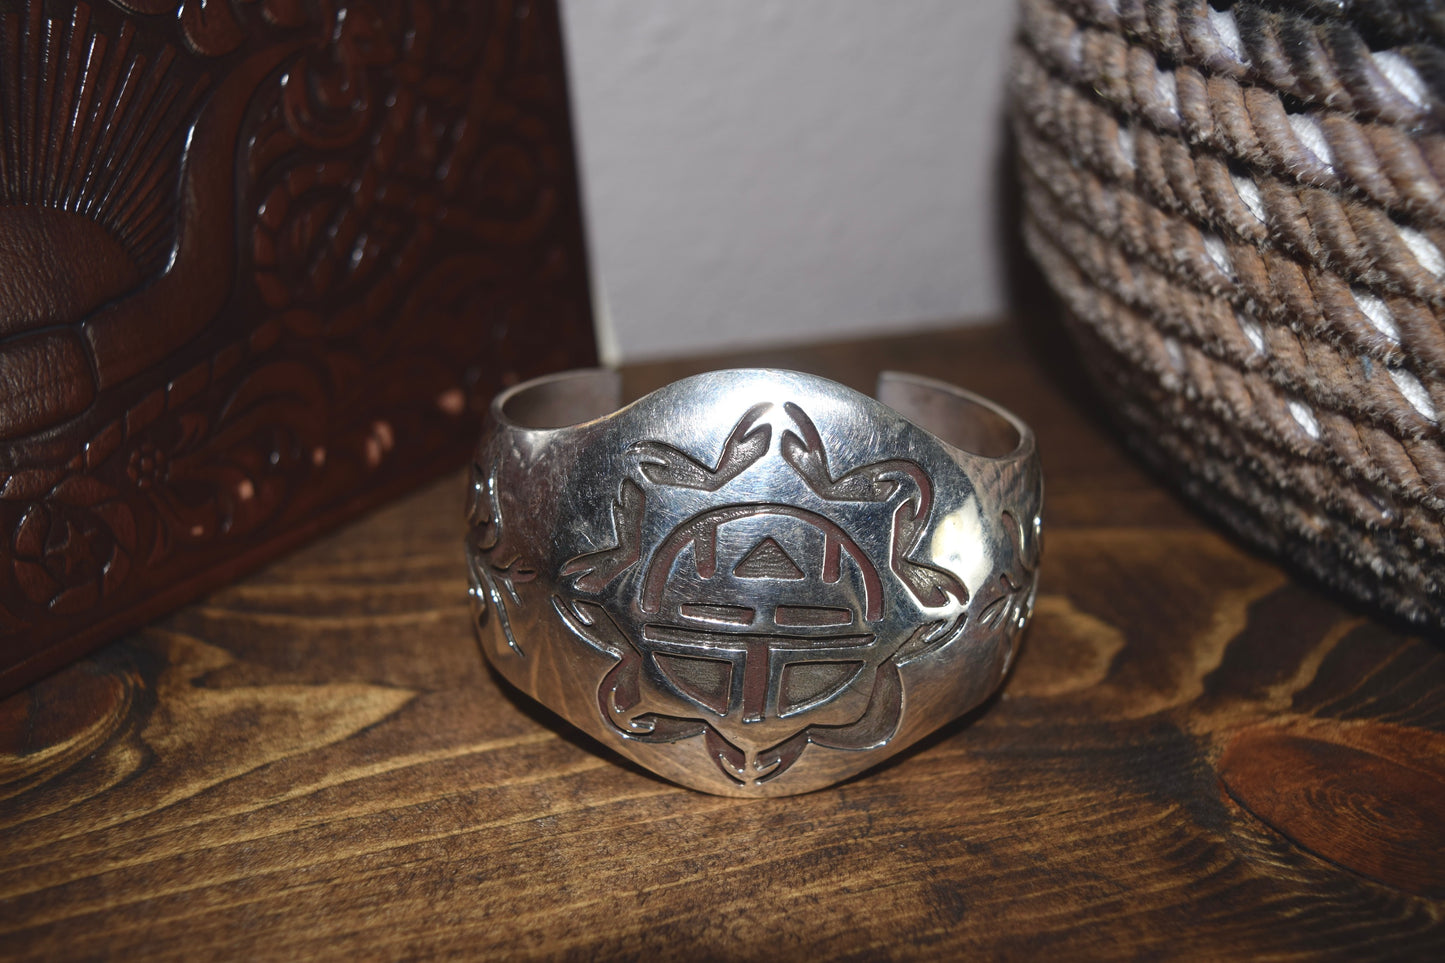 THE HOPI CRAFTED CUFF FROM THE RODGERS COLLECTION